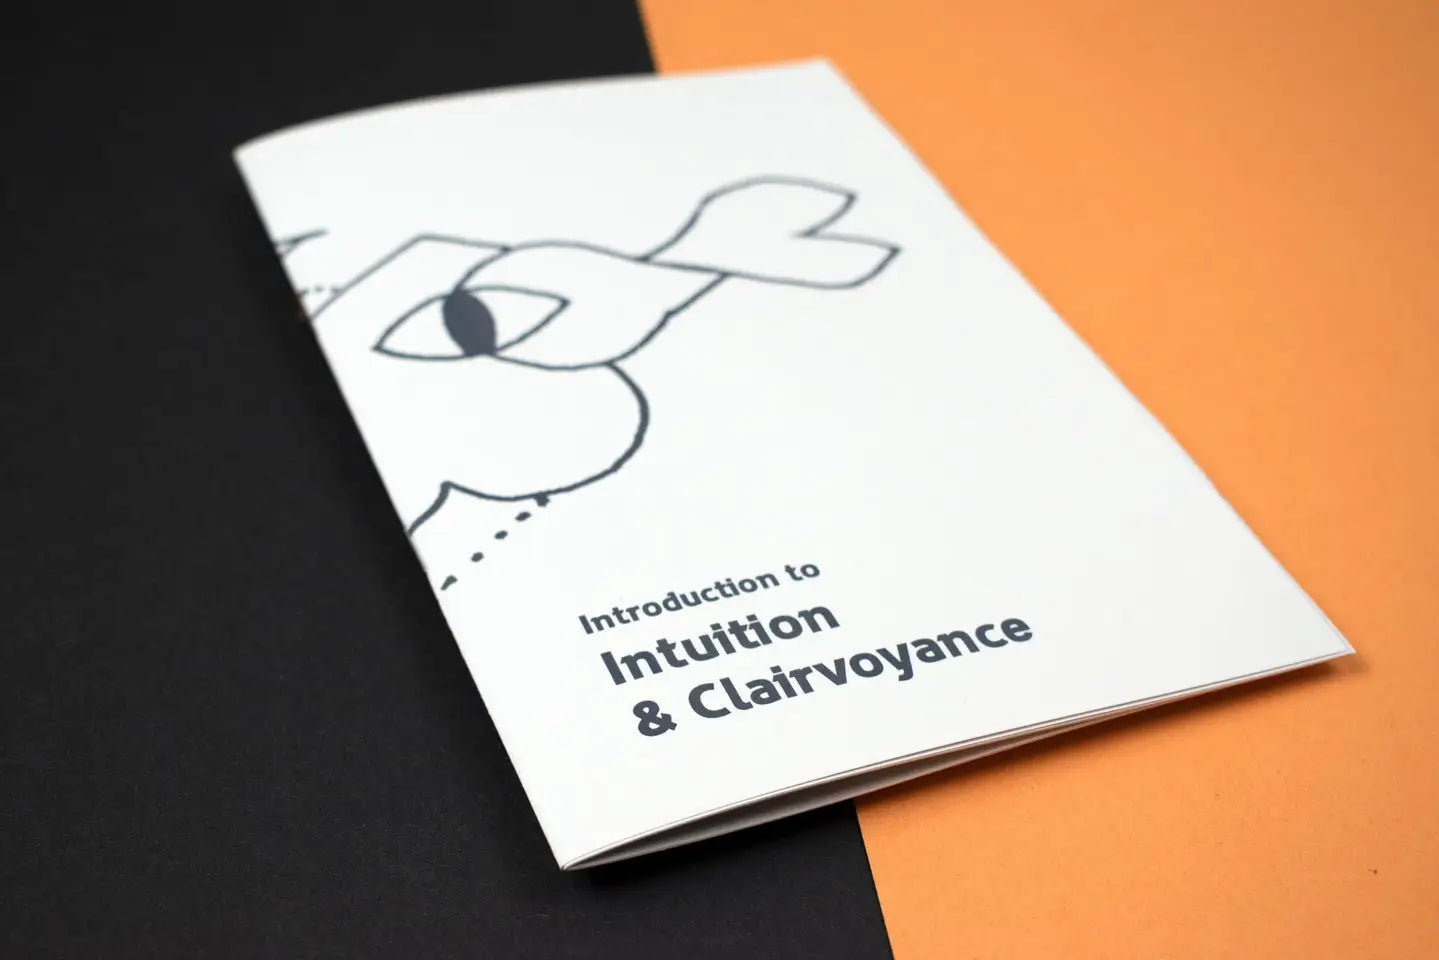 Introduction To Intuition & Clairvoyance (Zine)